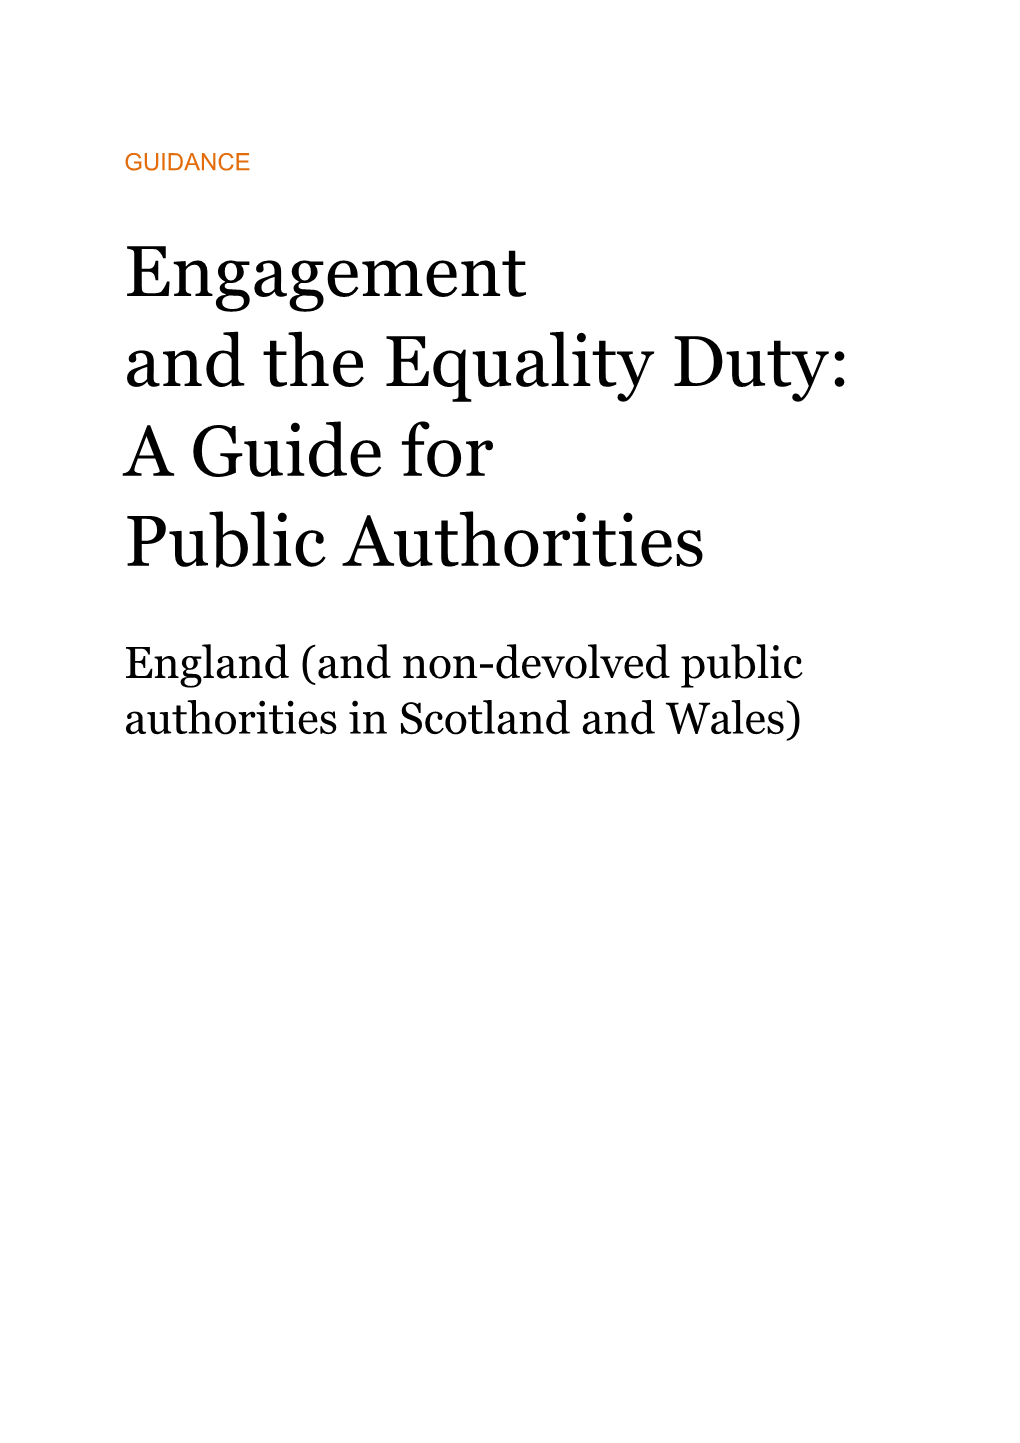 Engagement and the Equality Duty